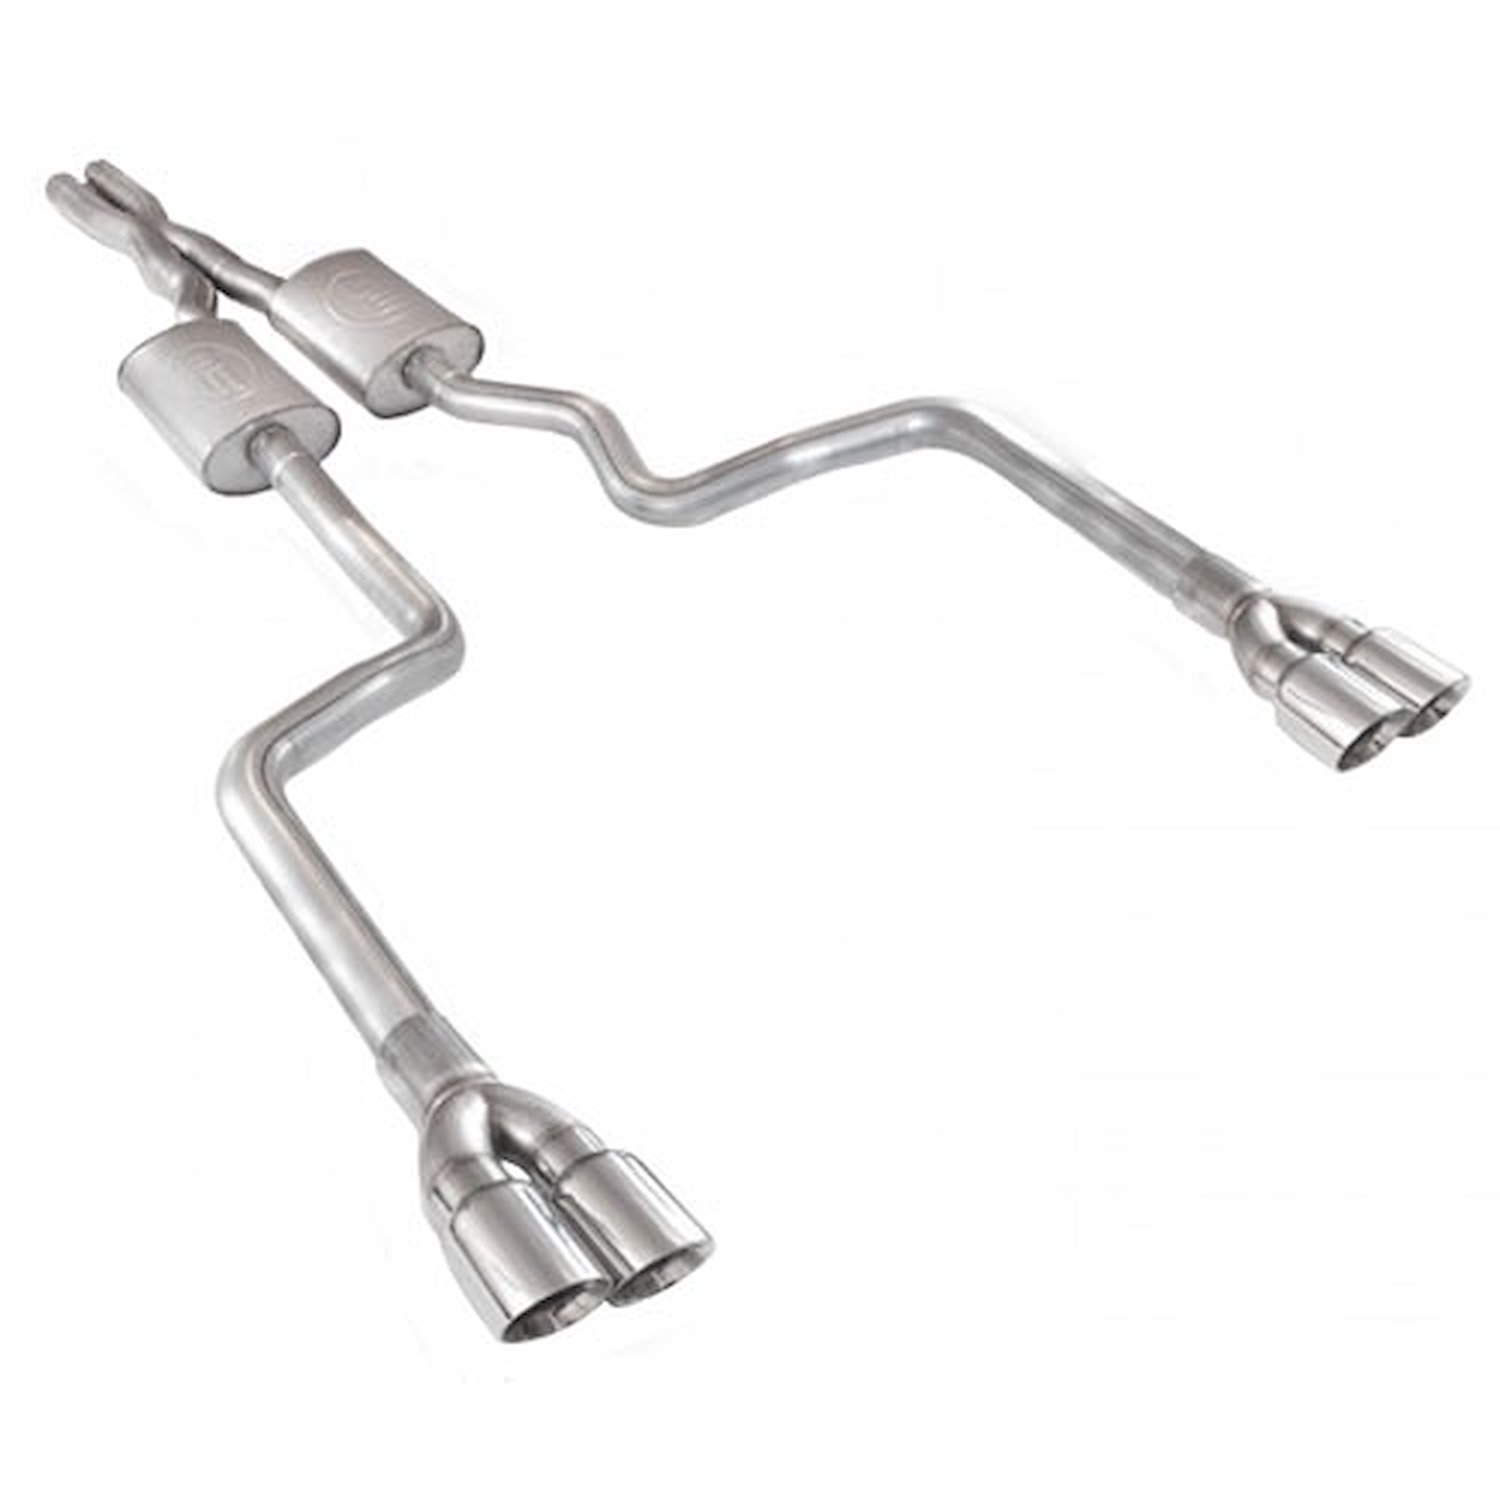 Dodge Challenger 2008-12 Exhaust 3 catback exhaust with X-Pipe and adapters to fit to factory manifo